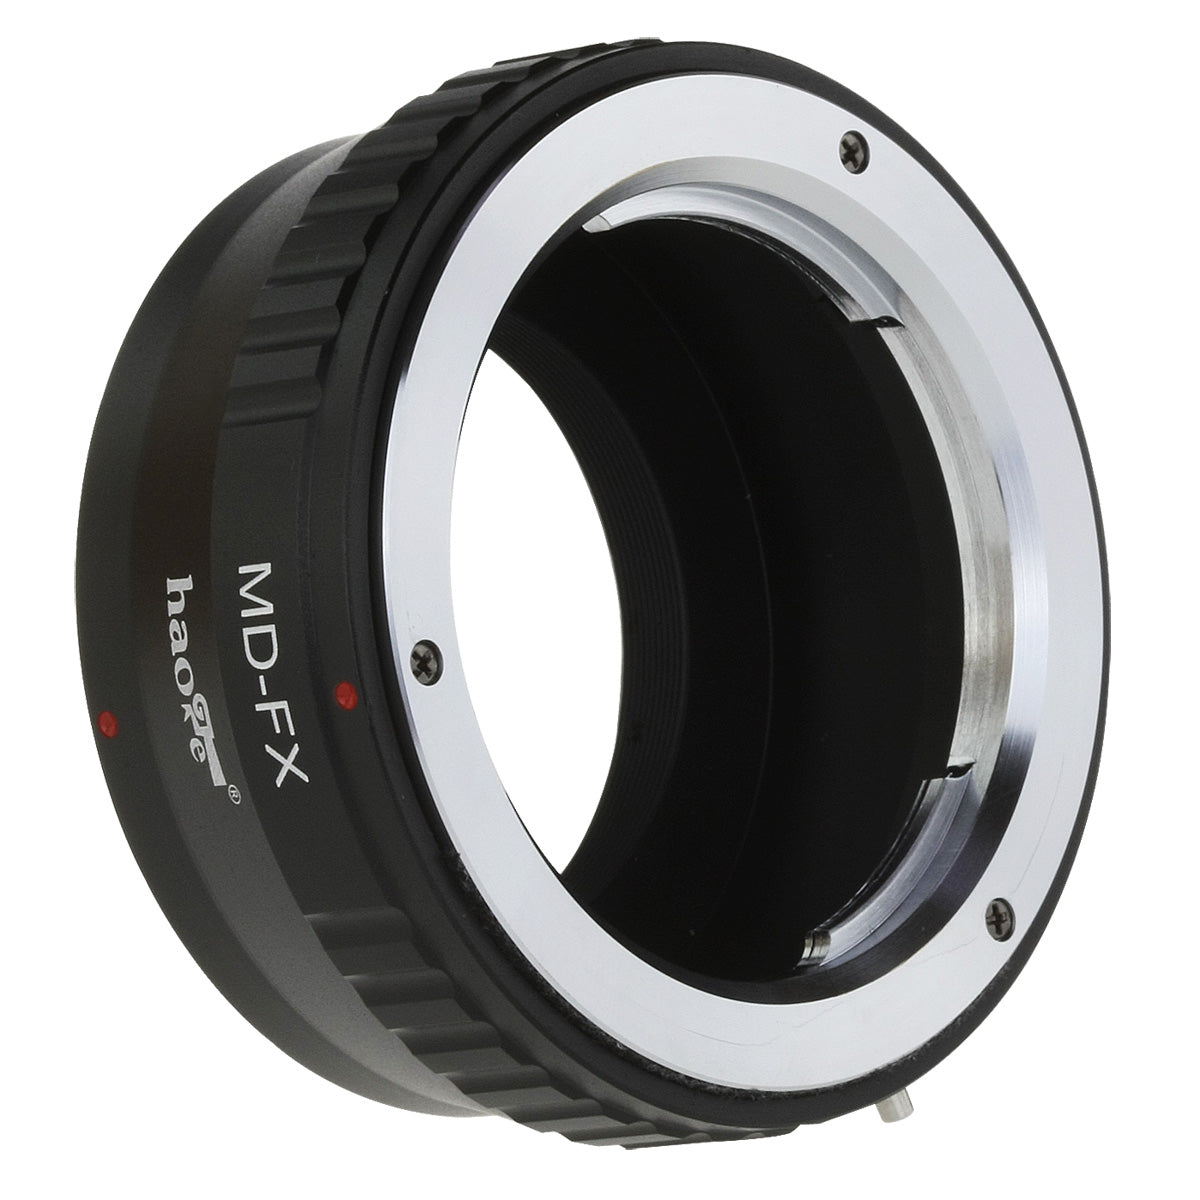 Haoge Lens Mount Adapter for Minolta MD mount Lens to Fujifilm X-mount Camera such as X-A1, X-A2, X-A3, X-A10, X-E1, X-E2, X-E2s, X-M1, X-Pro1, X-Pro2, X-T1, X-T2, X-T10, X-T20